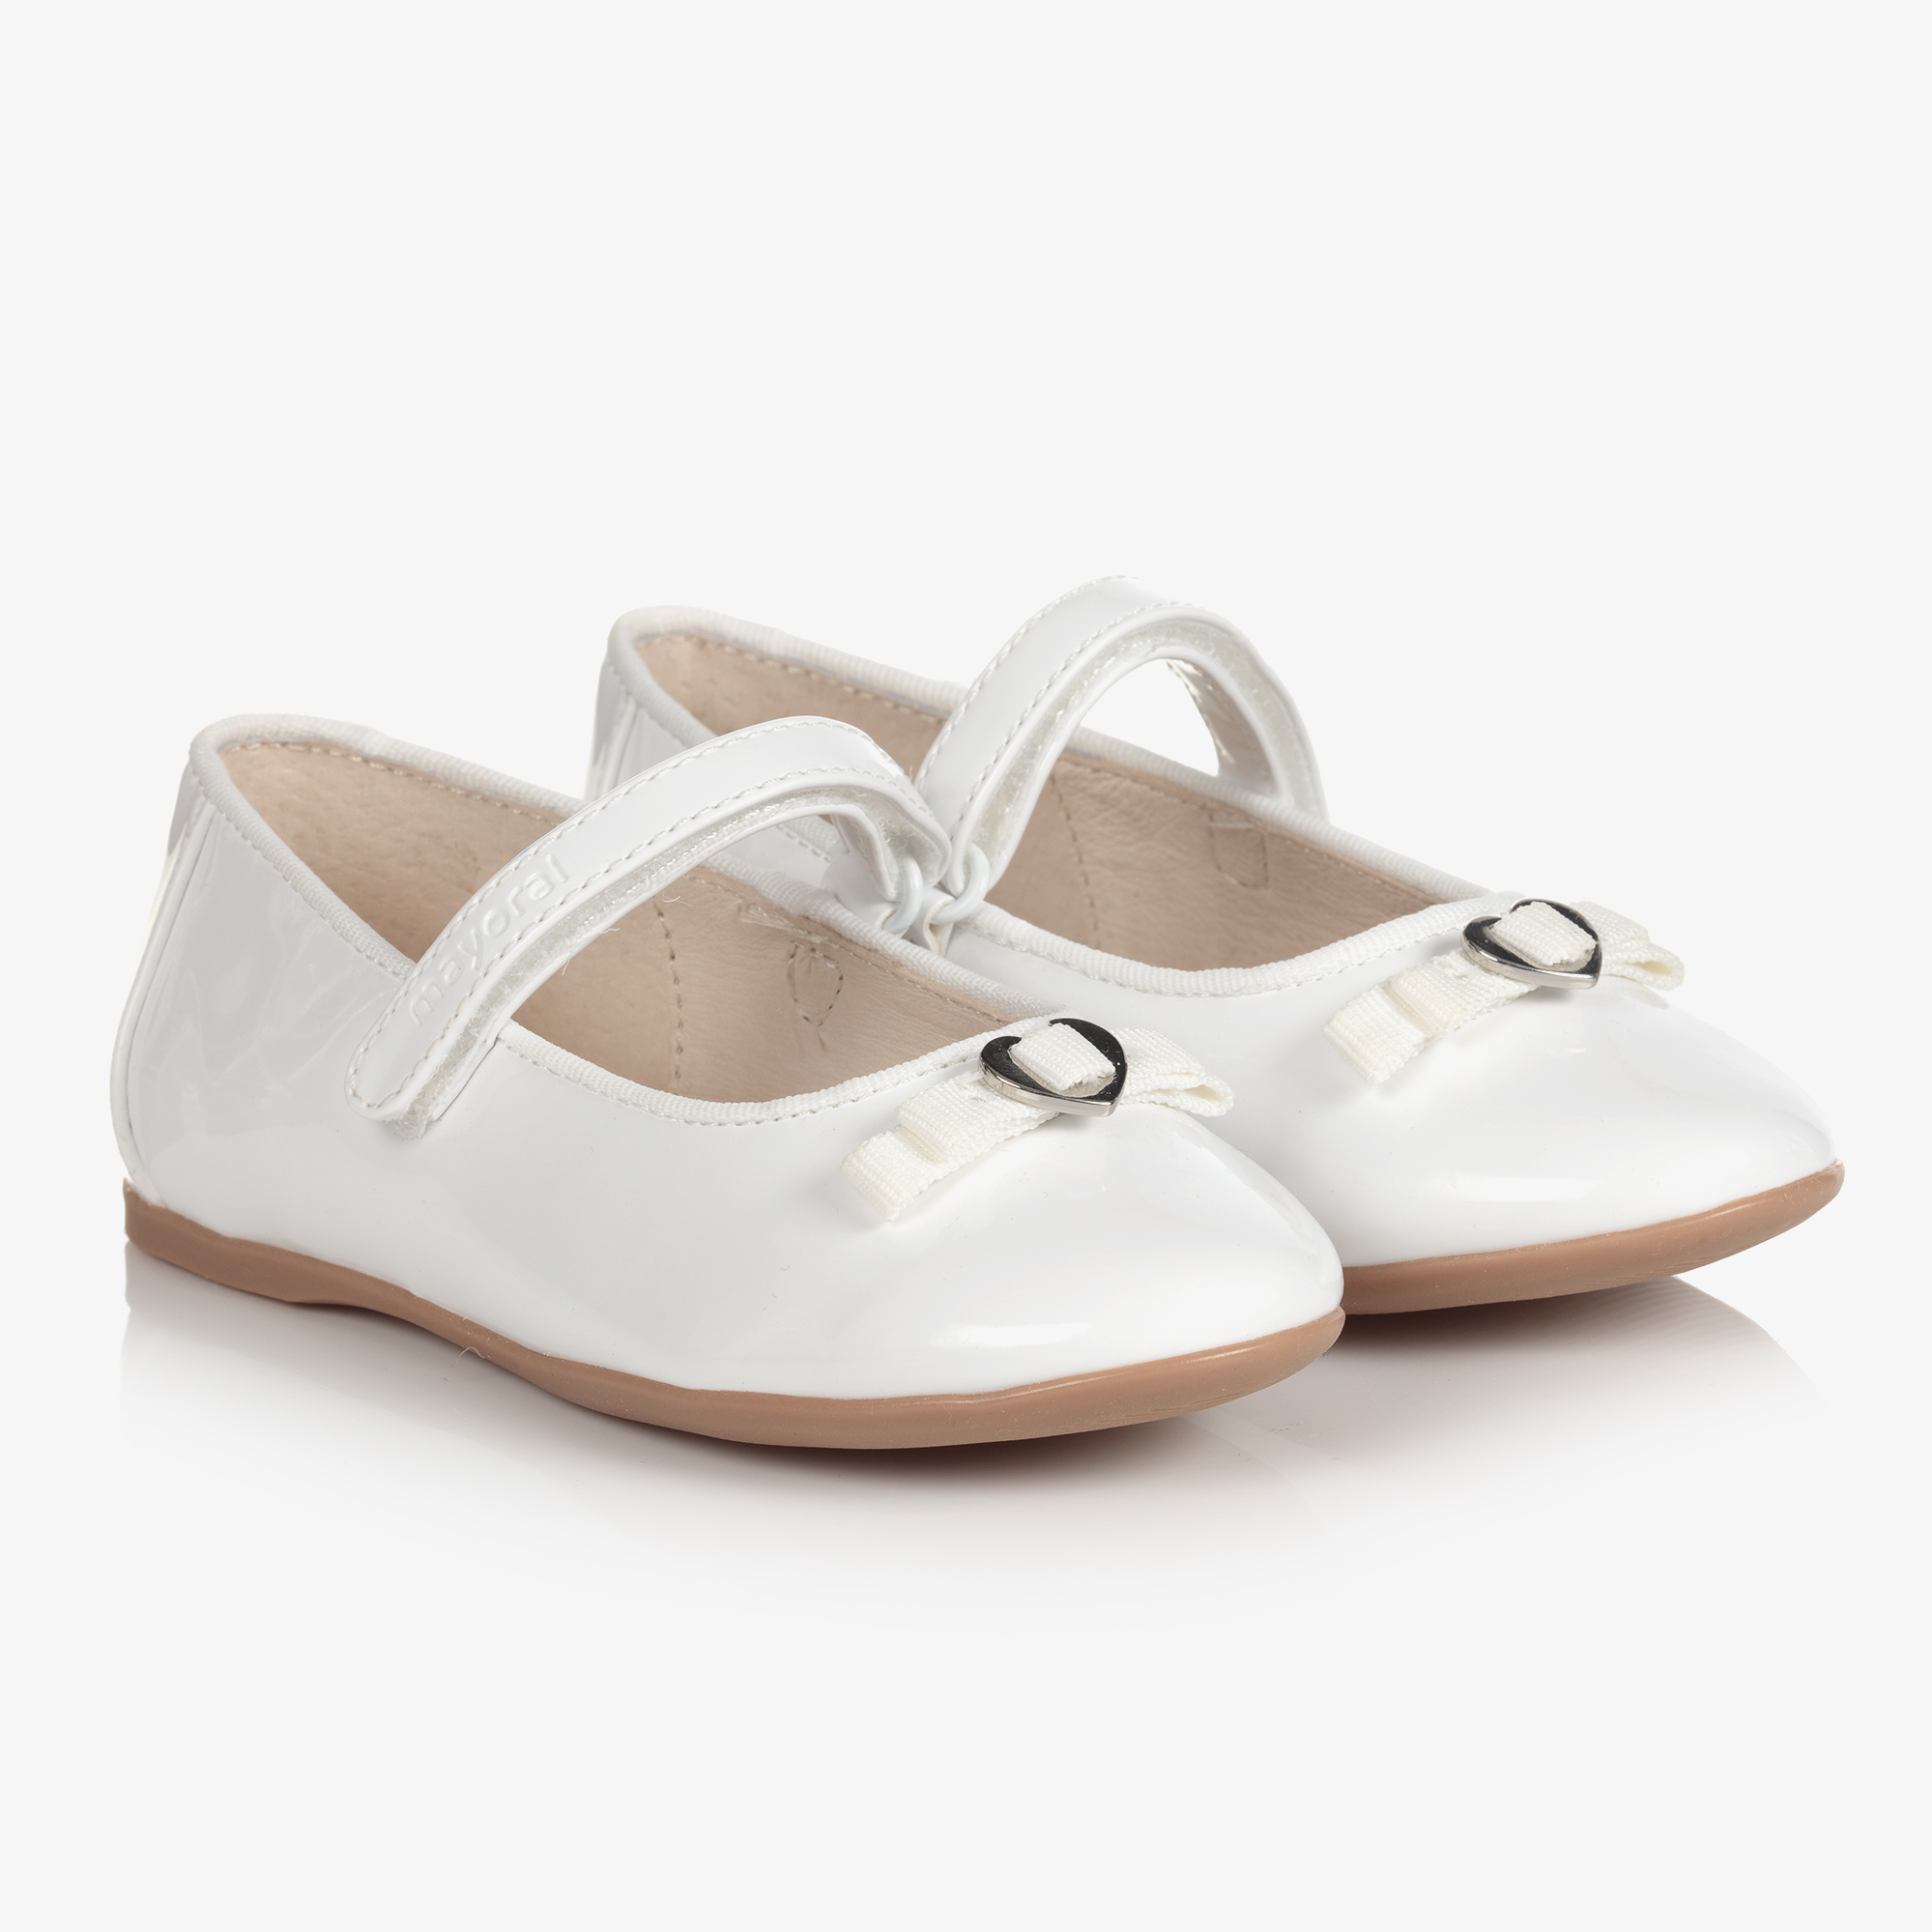 White Dolly Shoes | lupon.gov.ph